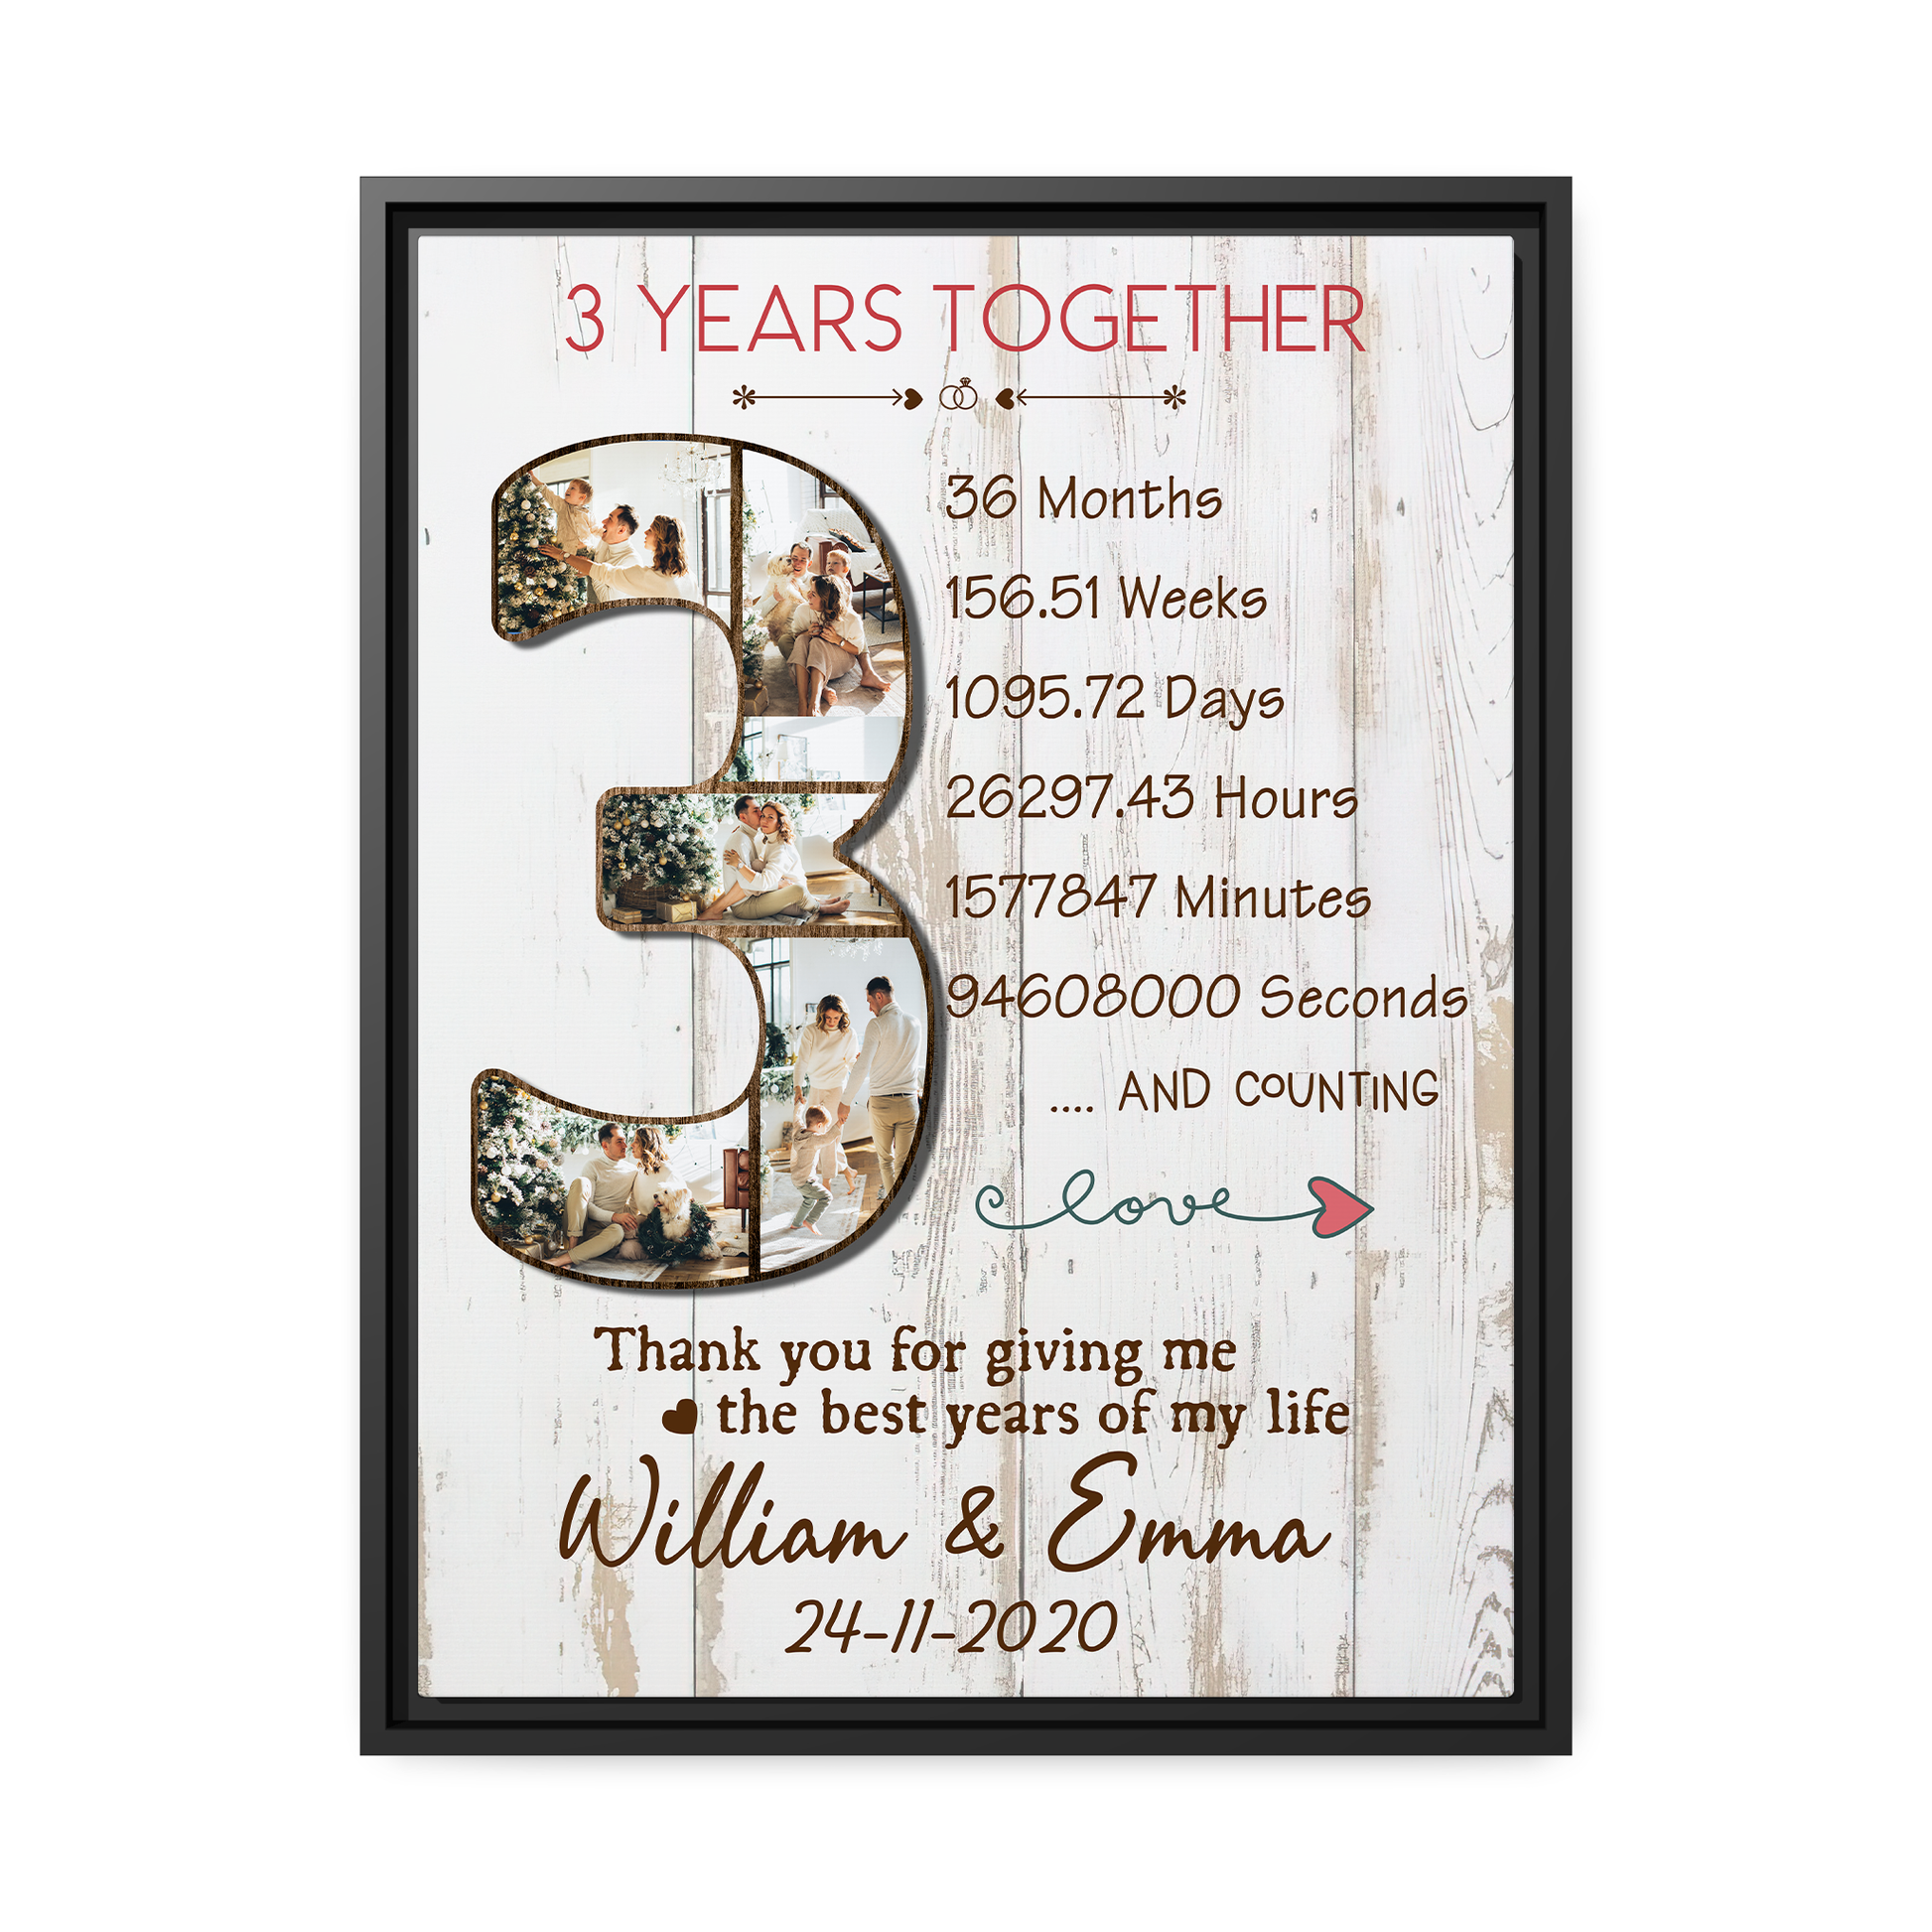 Personalized Couple Print Couple Gifts Christmas Gifts Custom Print  Anniversary Gift Boyfriend Gift Custom Couple Print Girlfriend Gifts 90 